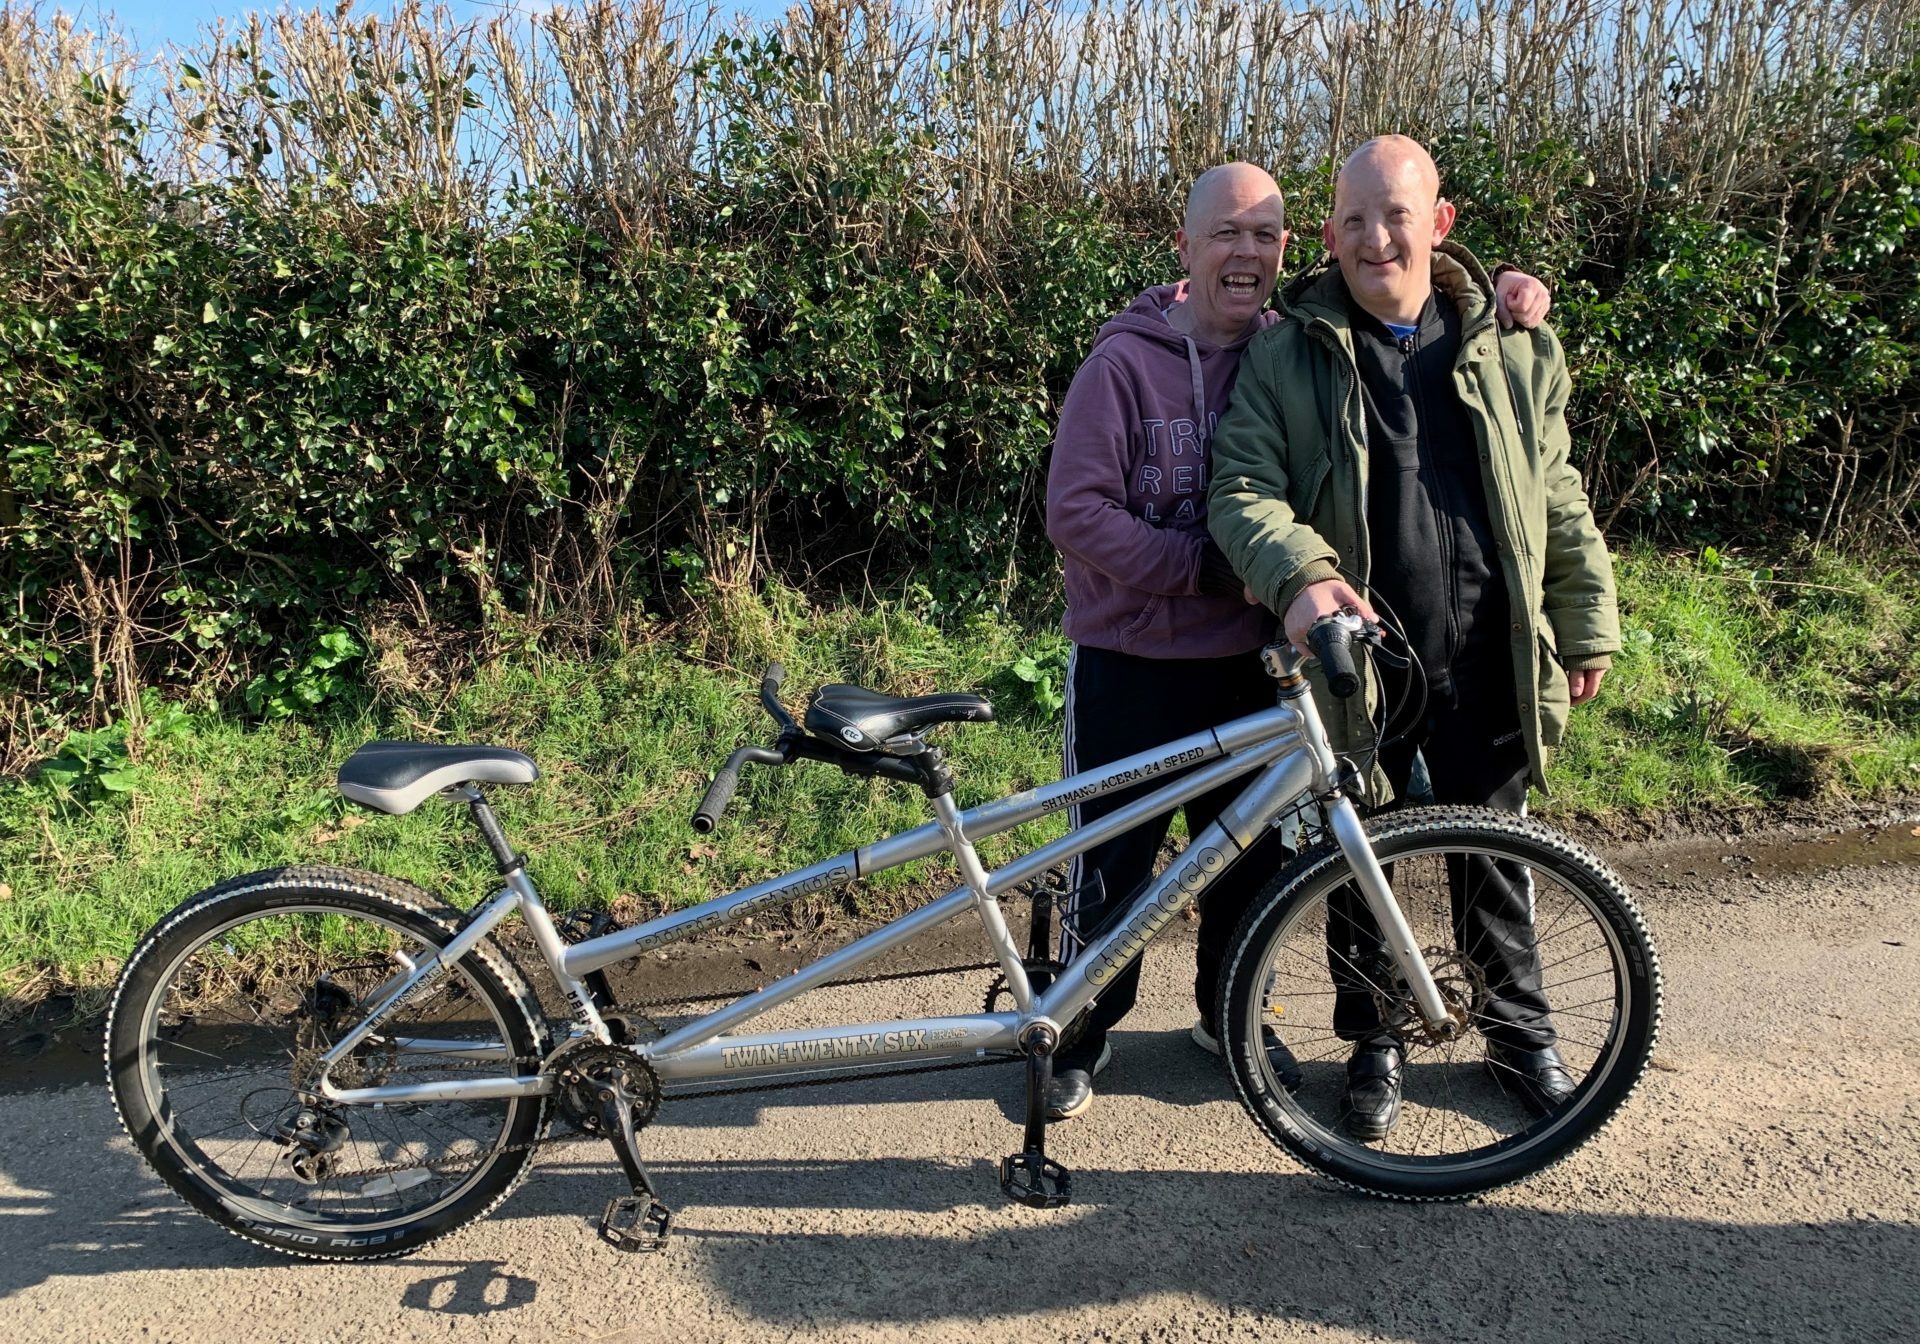 Paul and Lee standing next to each other in front of their tandem bike.